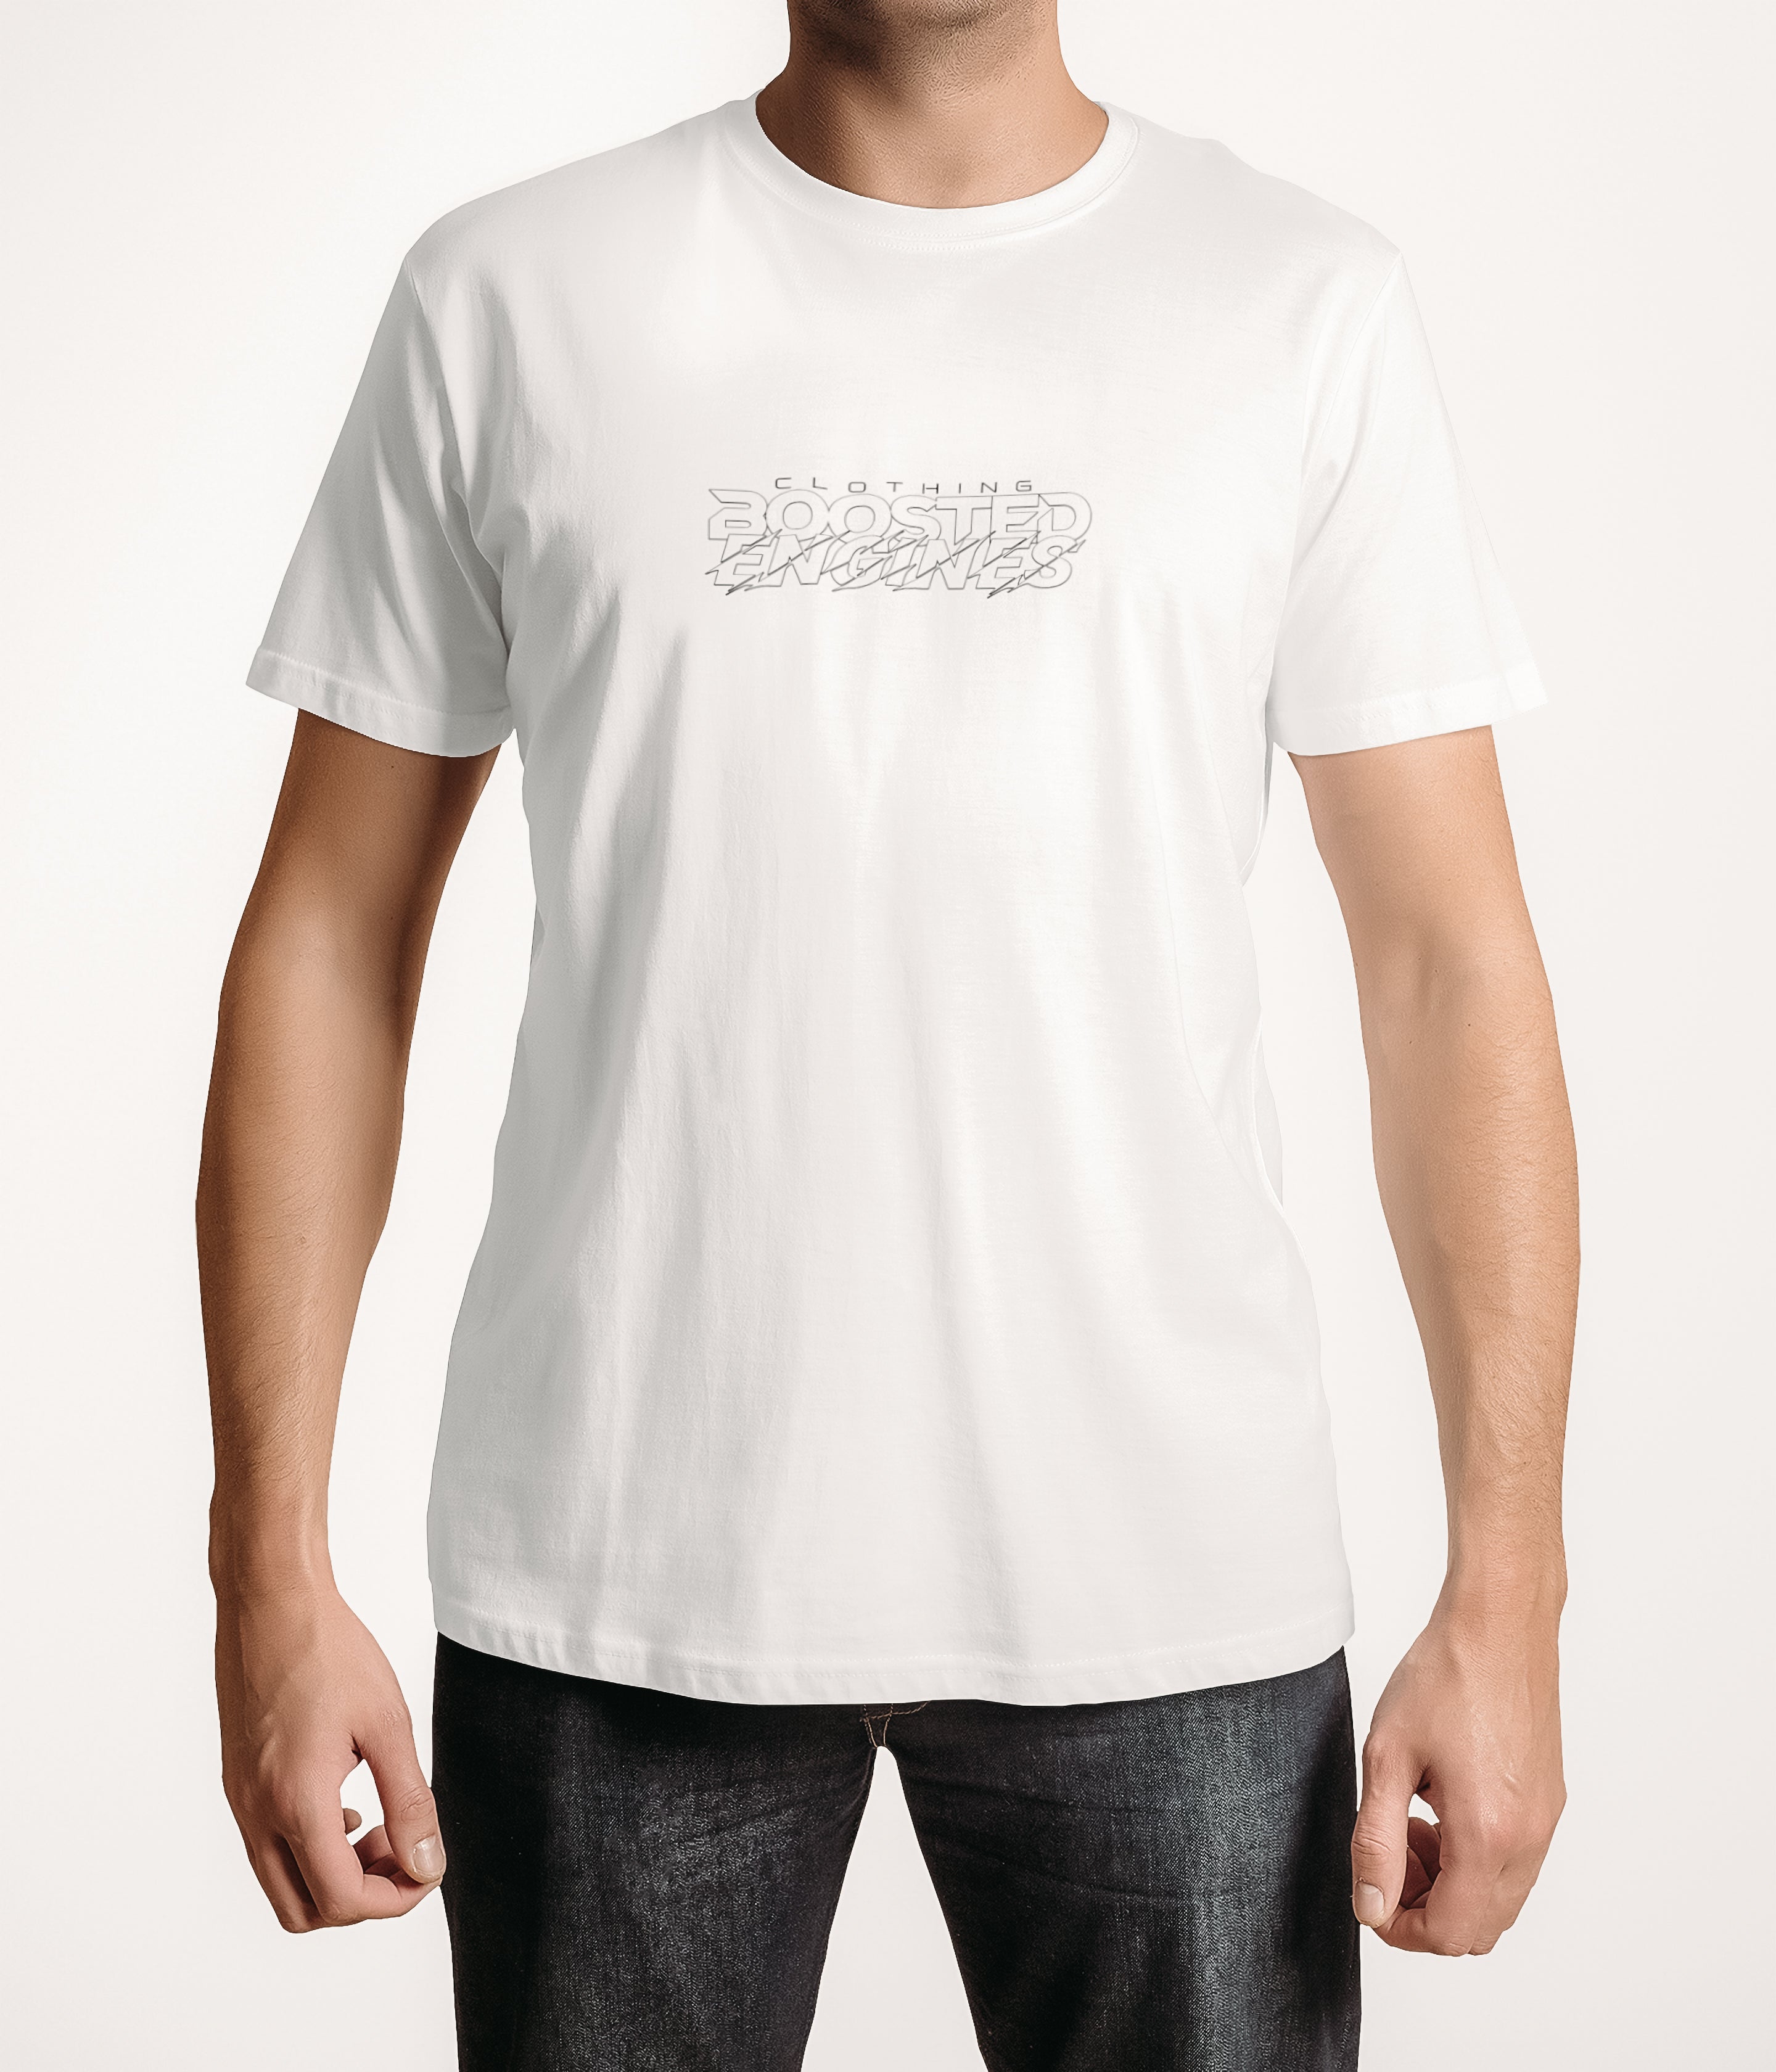 BOOSTED ENGINES ''R8 BOOSTED V2'' MEN'S T-SHIRT